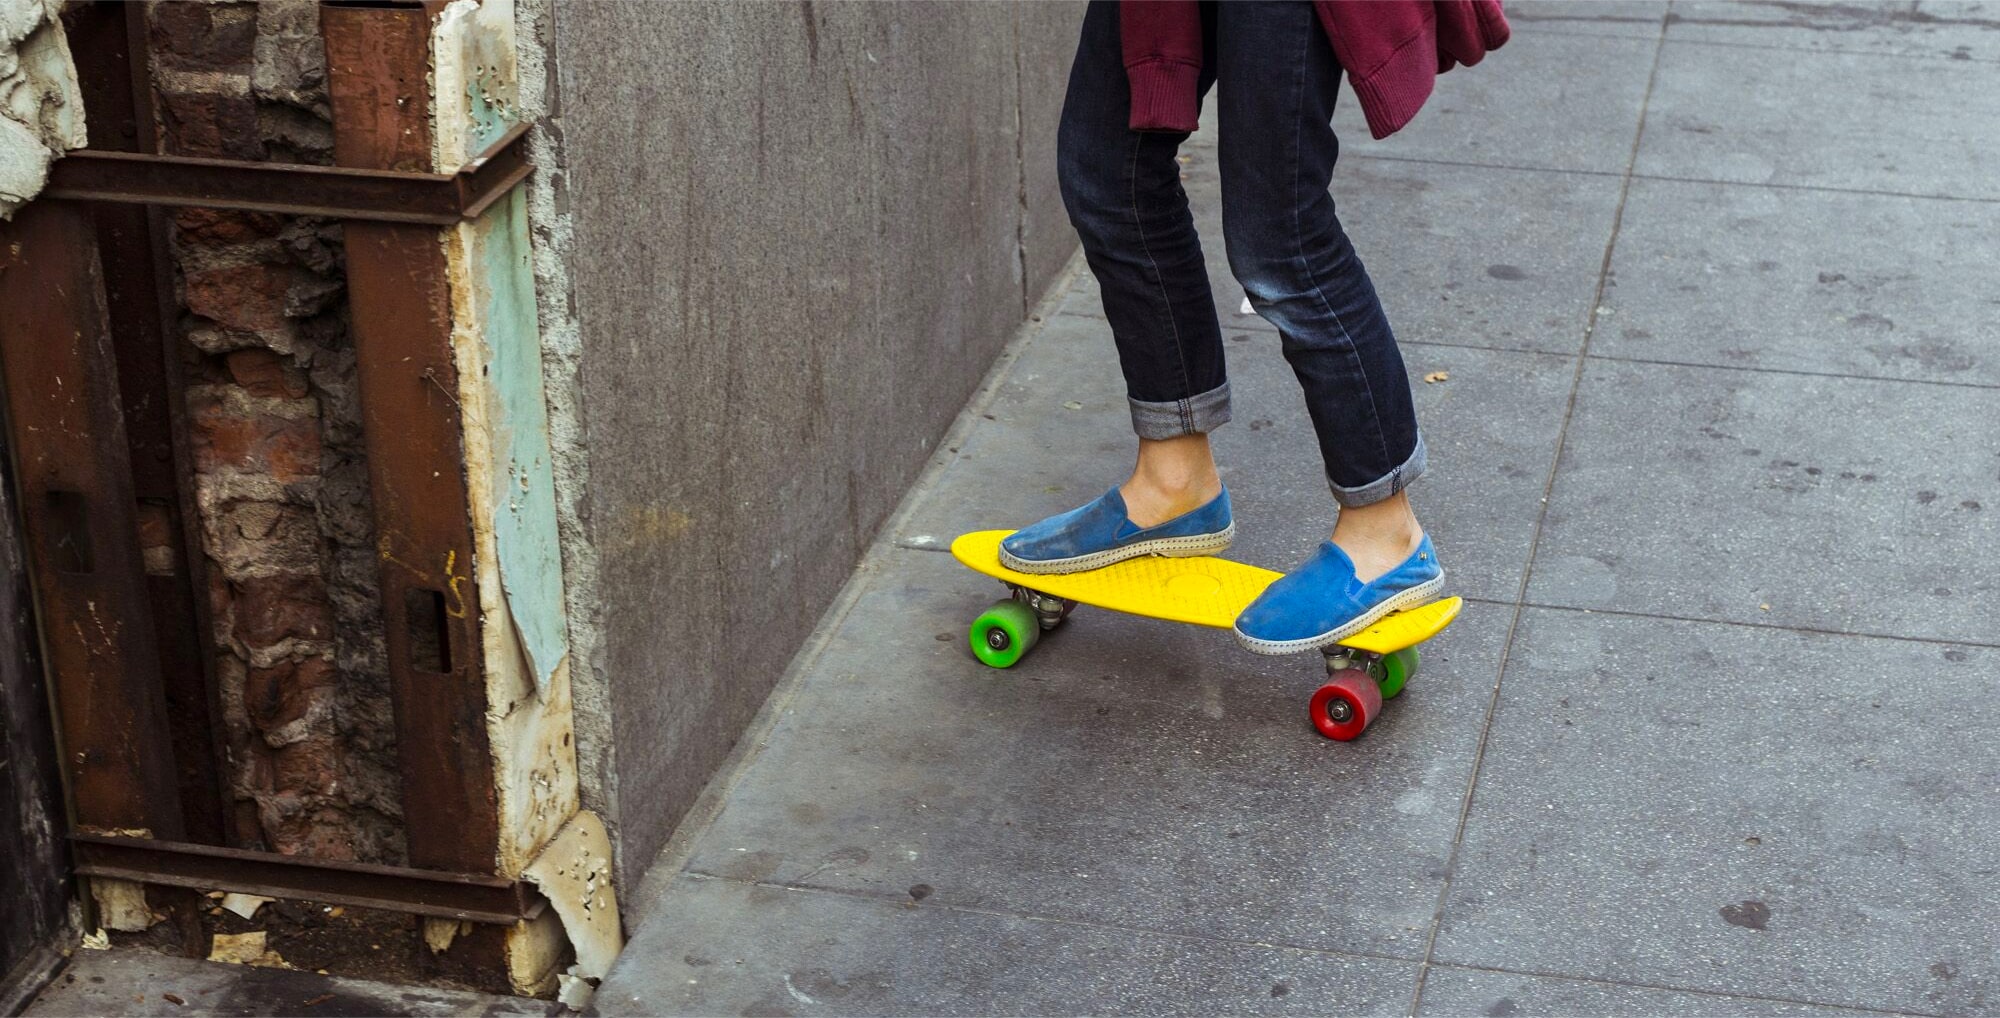 Close up of colorful skateboard with skateboarder on it in LA streets